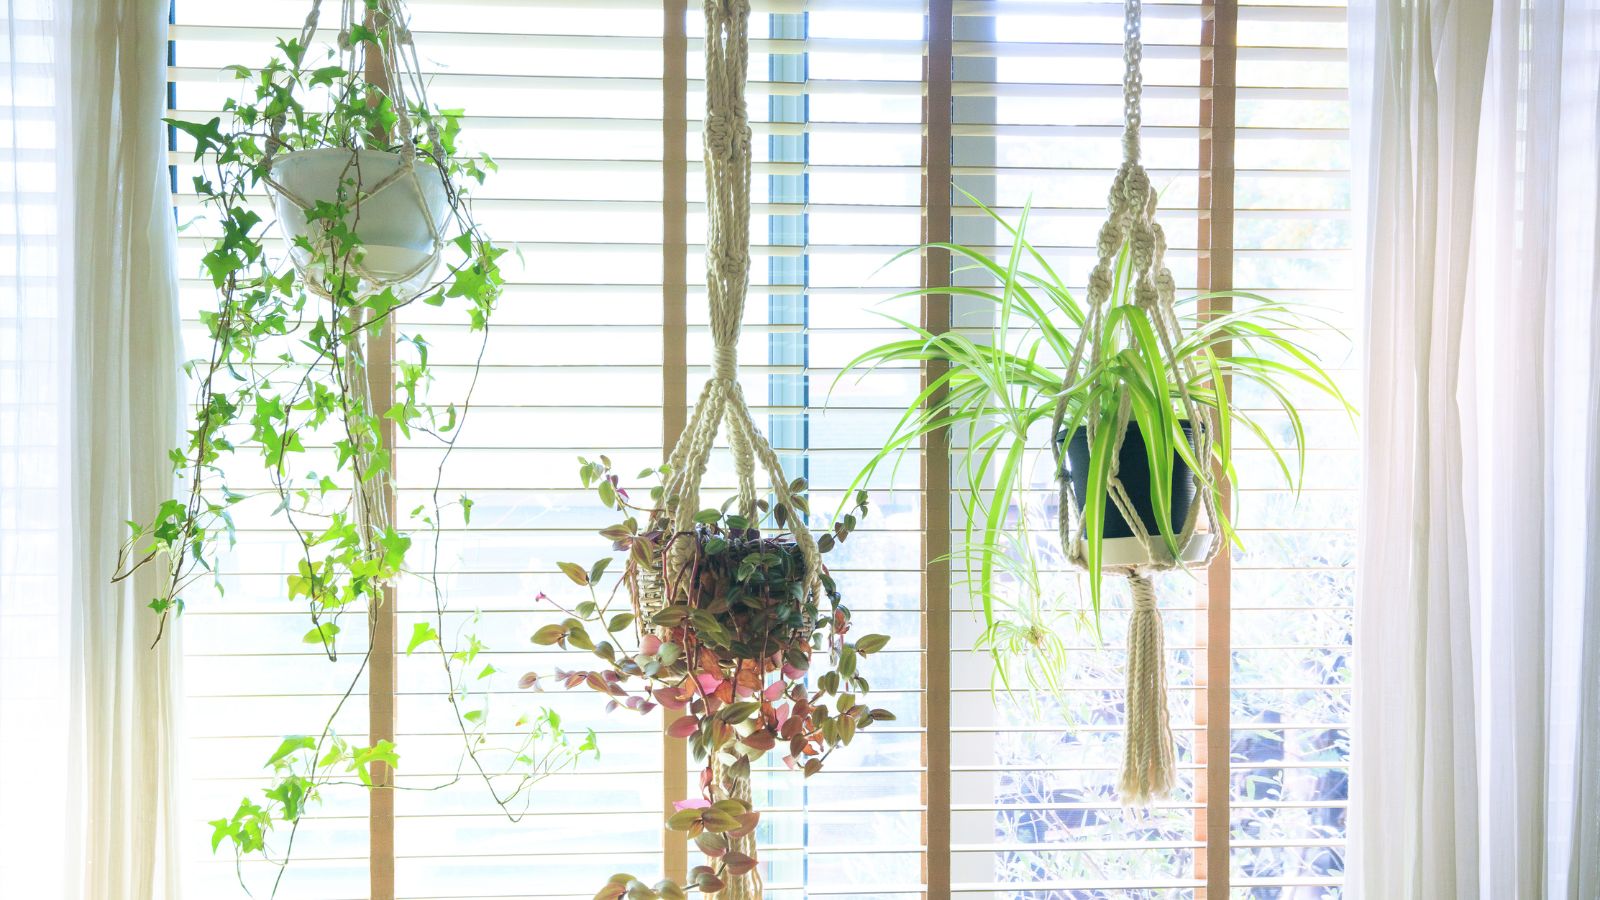 Add Interest and Dimension to Your Space With Hanging Plants
